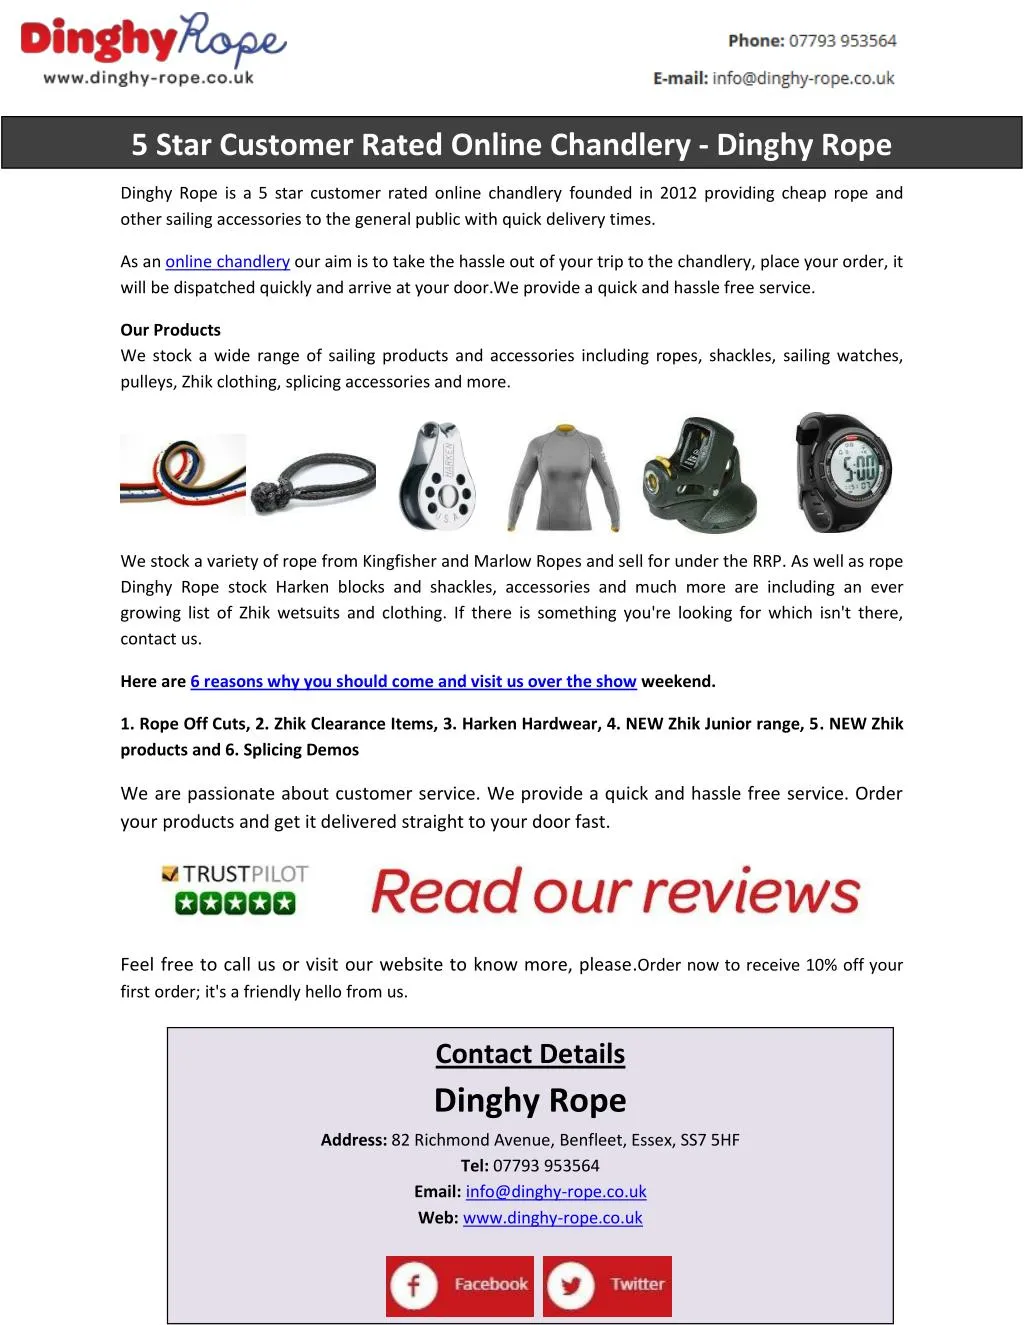 5 star customer rated online chandlery dinghy rope